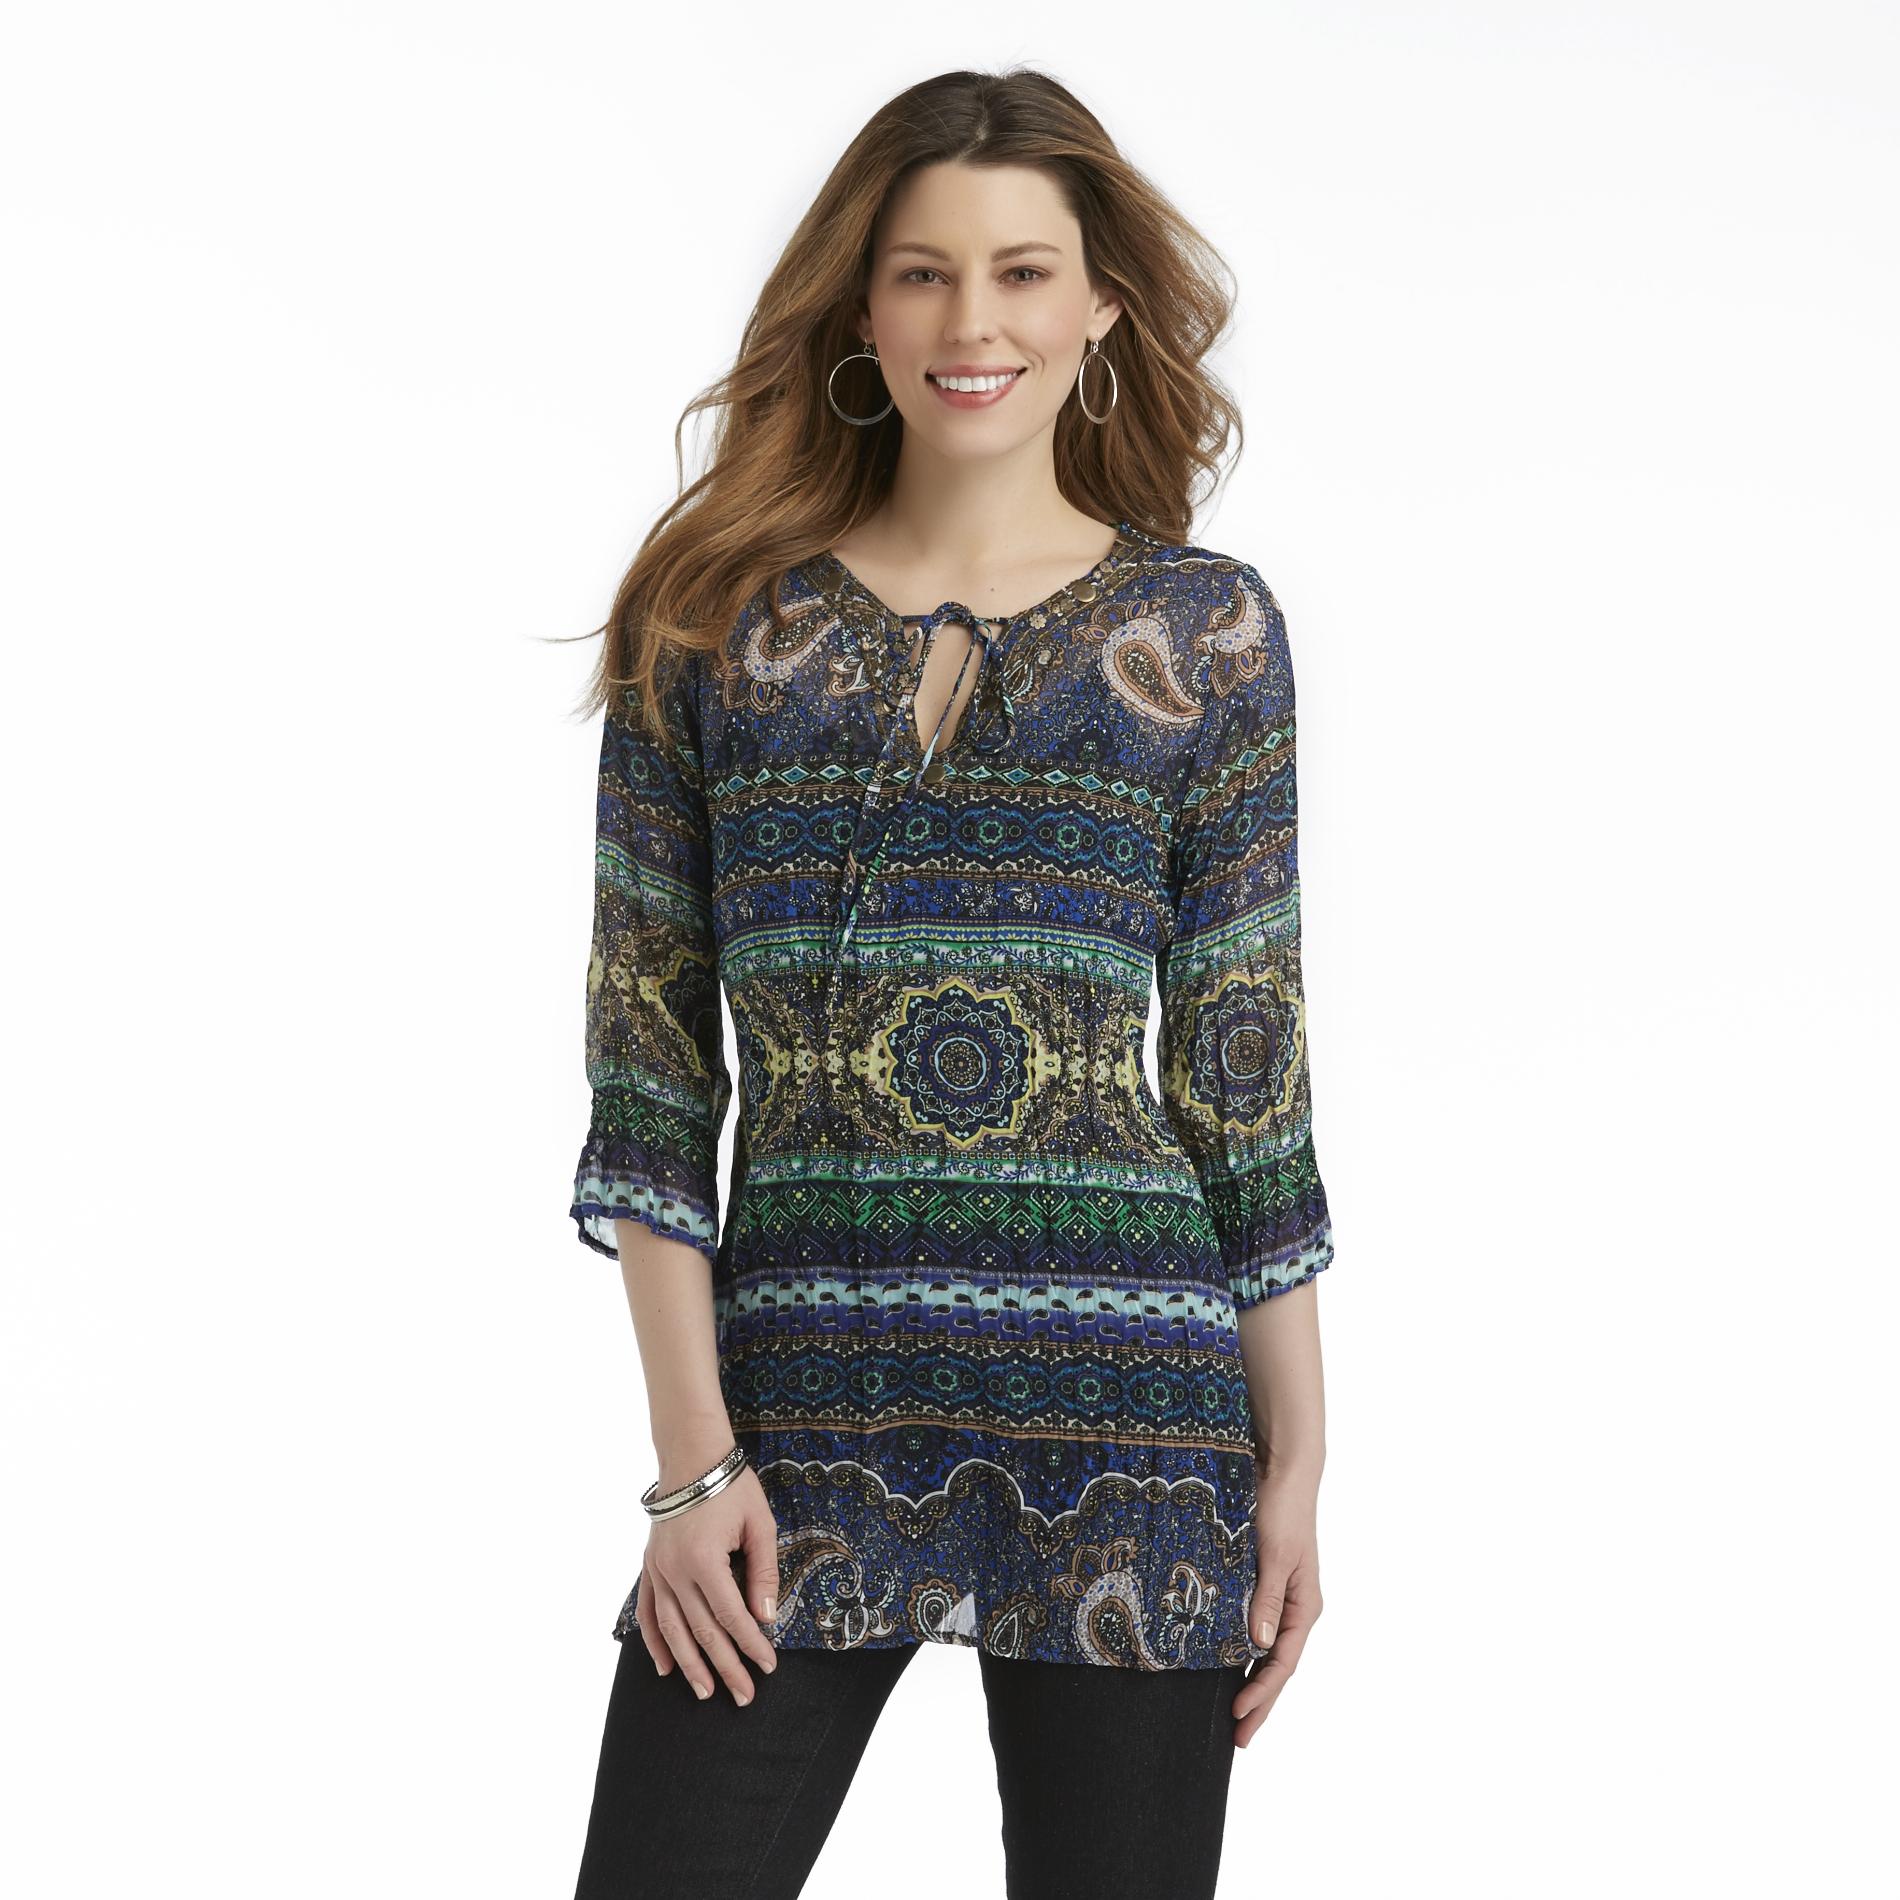 Canyon River Blues Women's Embellished Peasant Top - Paisley